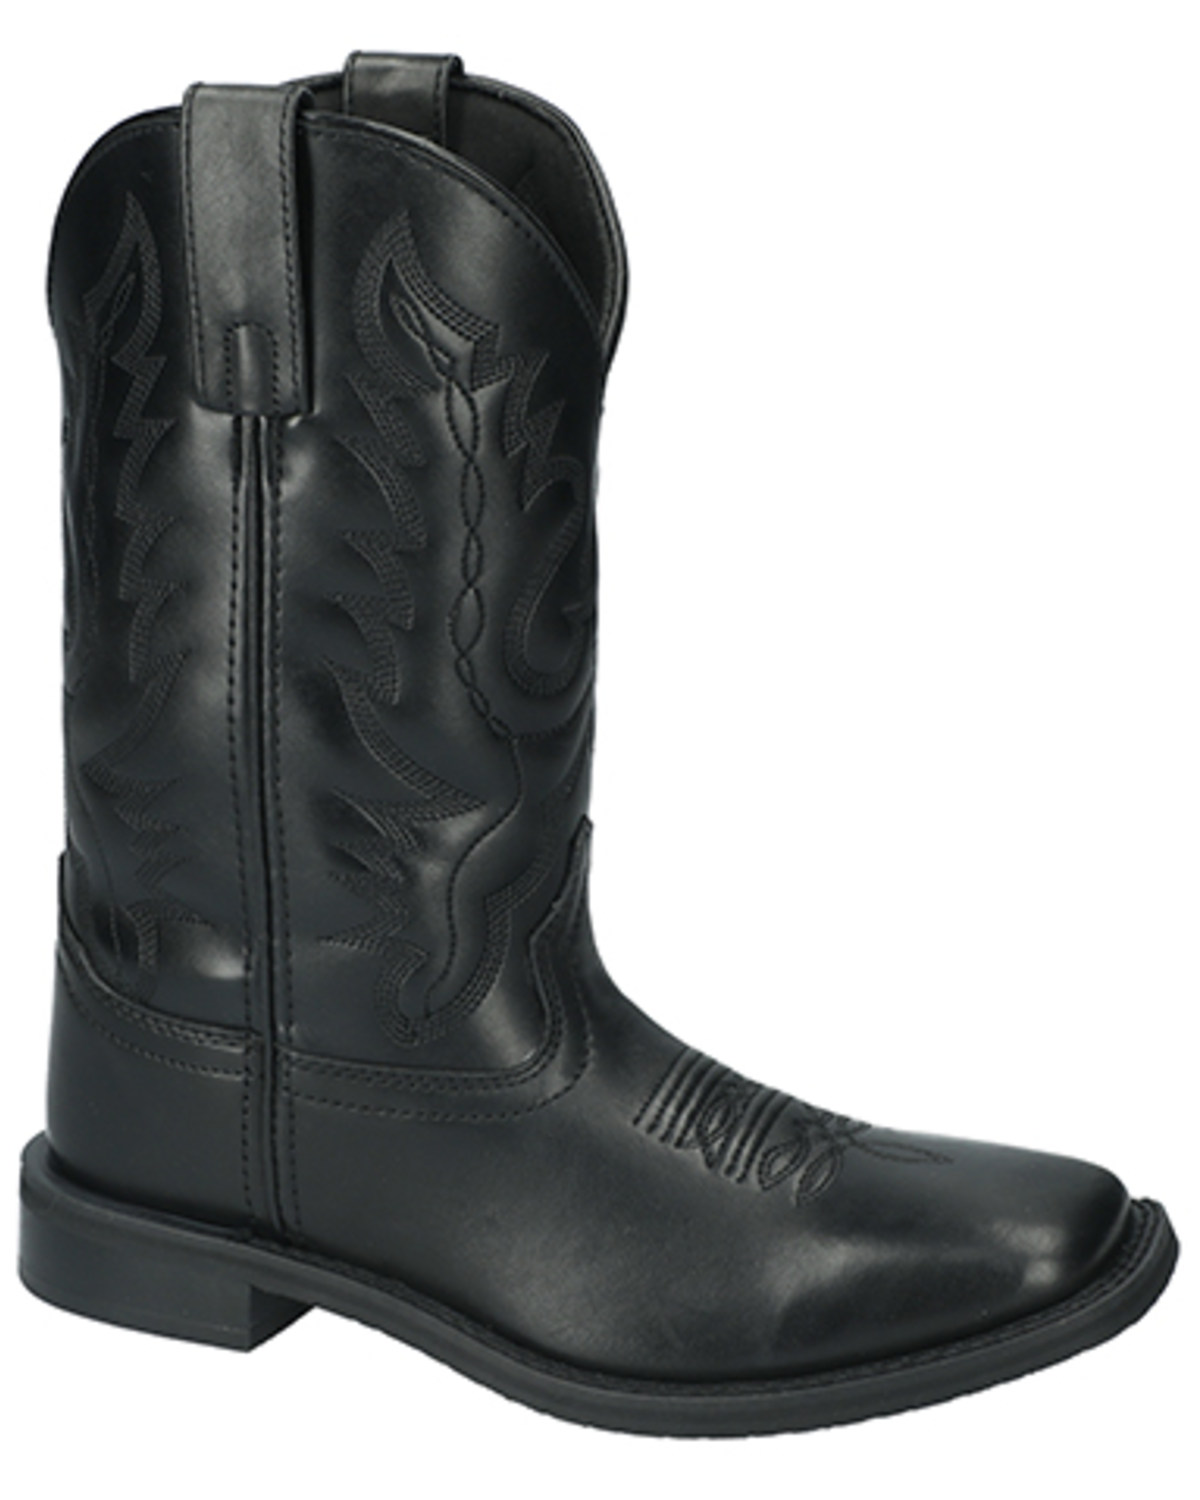 Smoky Mountain Women's Outlaw Western Boots - Broad Square Toe